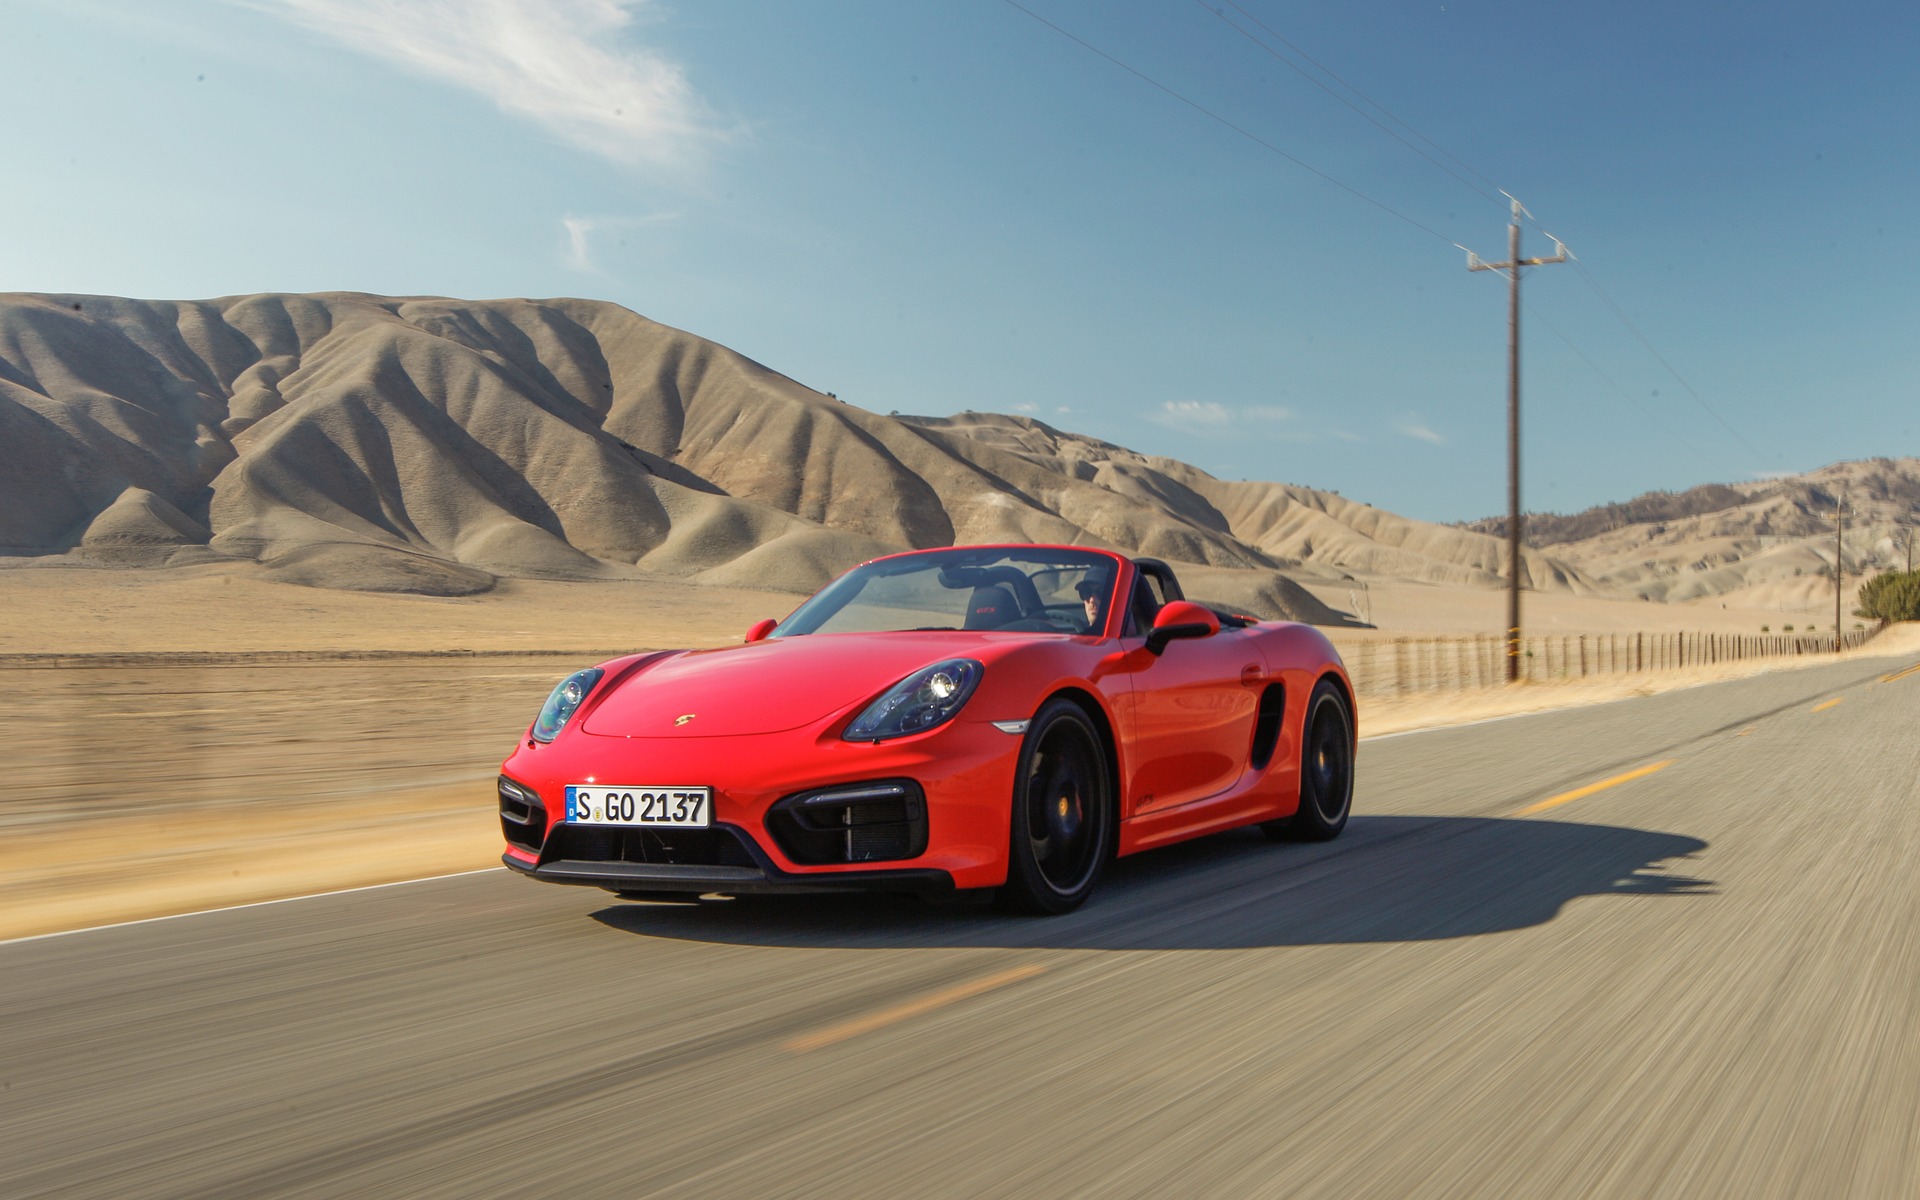 Think of it as the Boxster S with several bonuses.